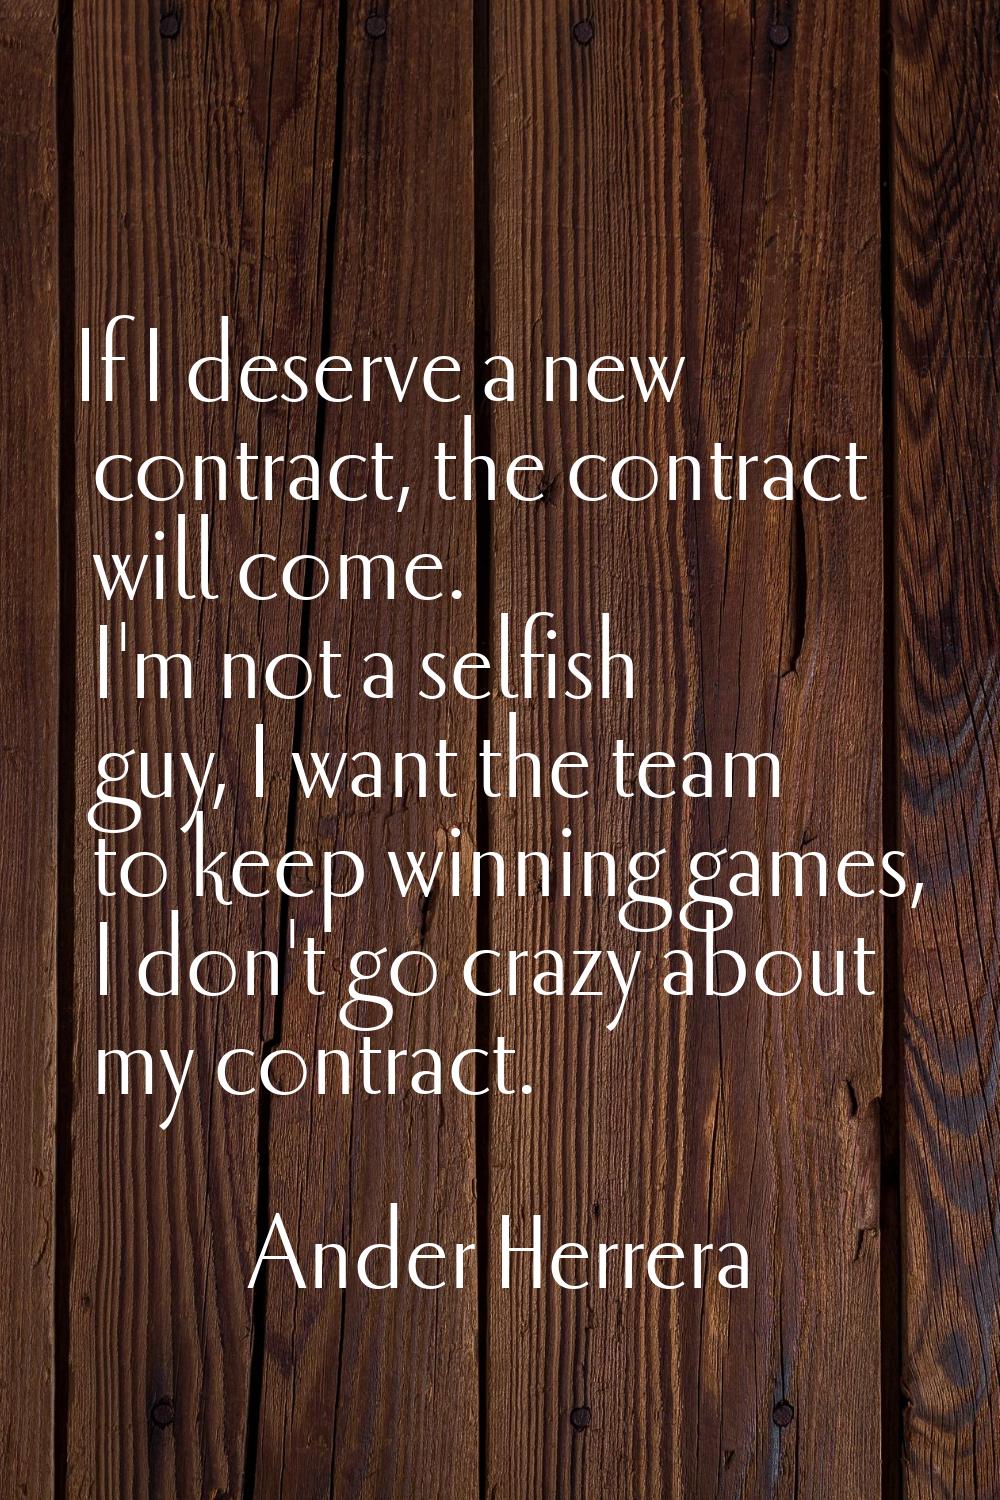 If I deserve a new contract, the contract will come. I'm not a selfish guy, I want the team to keep